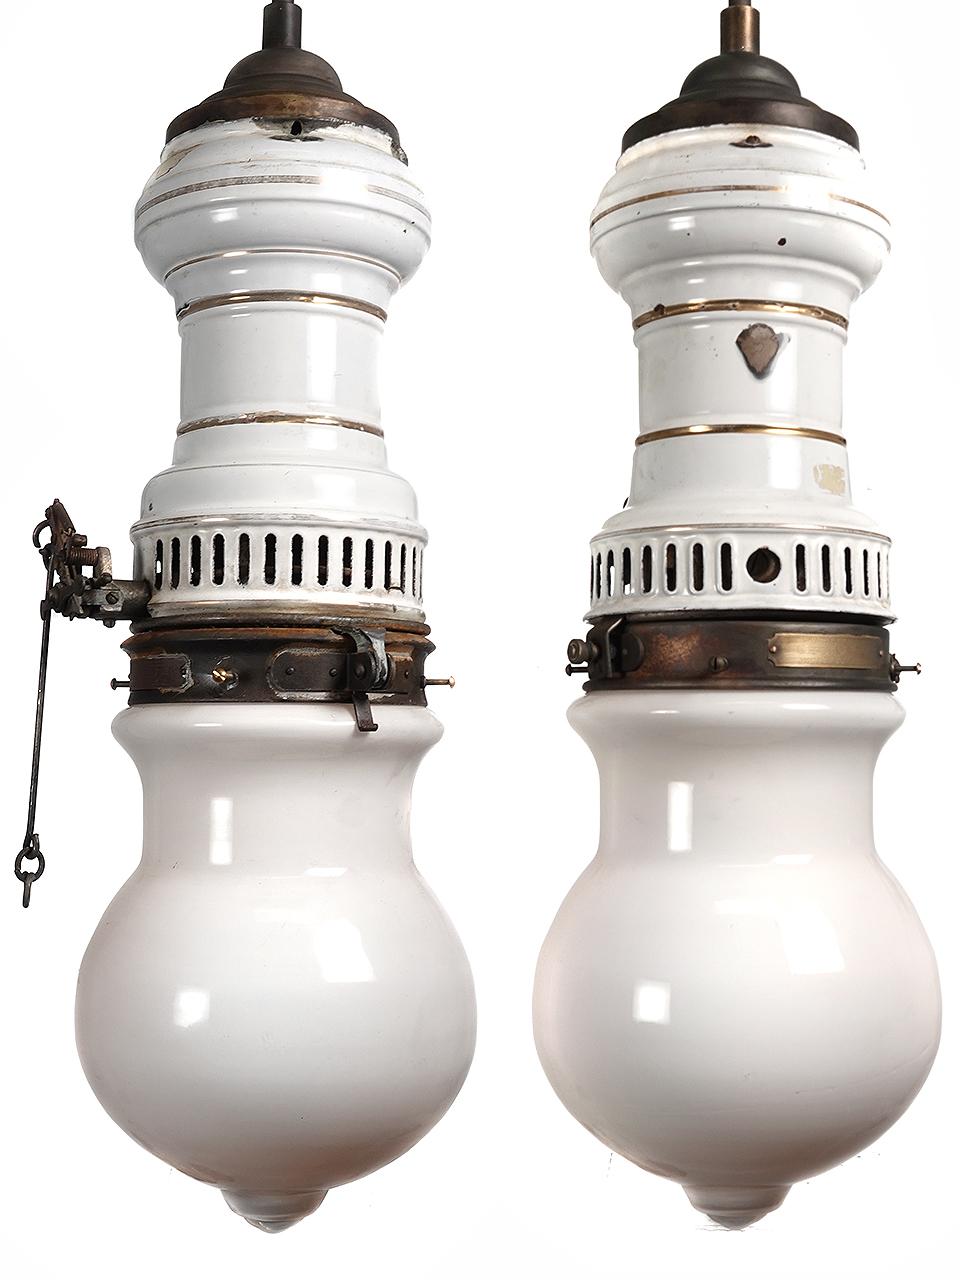 The pair of lamps are signed by the Humphrey Lamp Co. We were able to electrify the gas lamps without changing the character. Both white porcelain fixtures are of the same style with subtle differences that makes for an interesting set. The